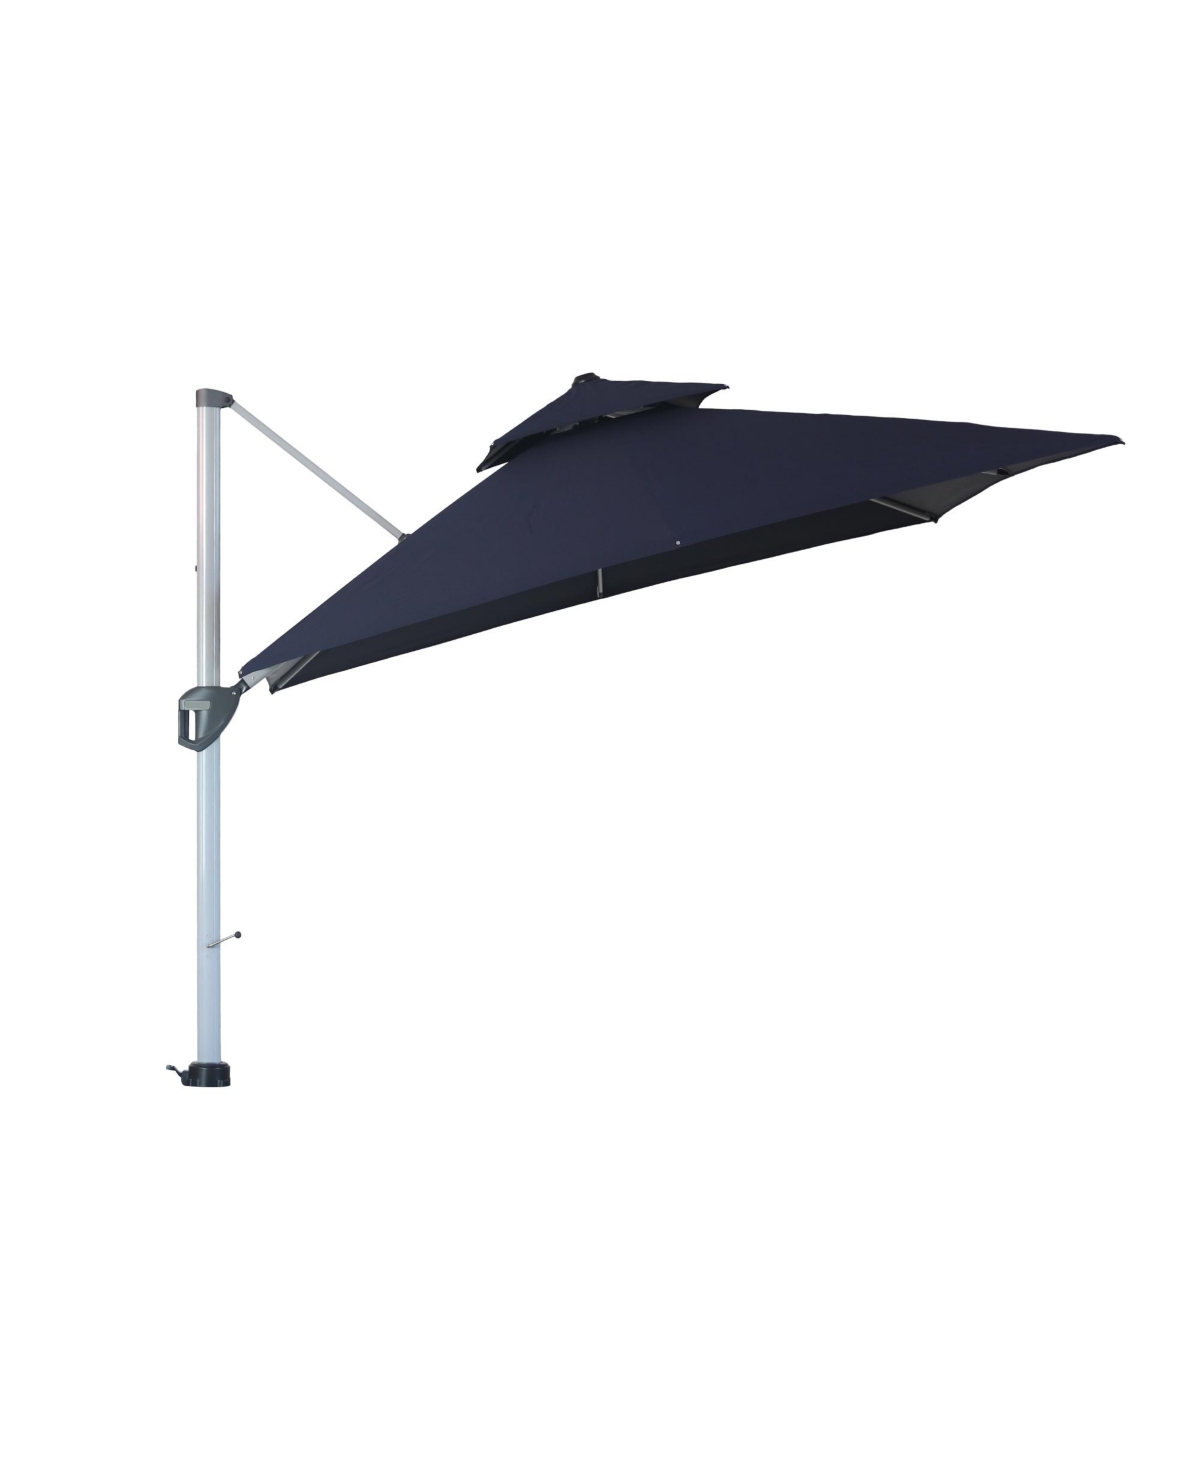 10ft 2-Tier Square Cantilever Outdoor Patio Umbrella with Included Cover - Tan